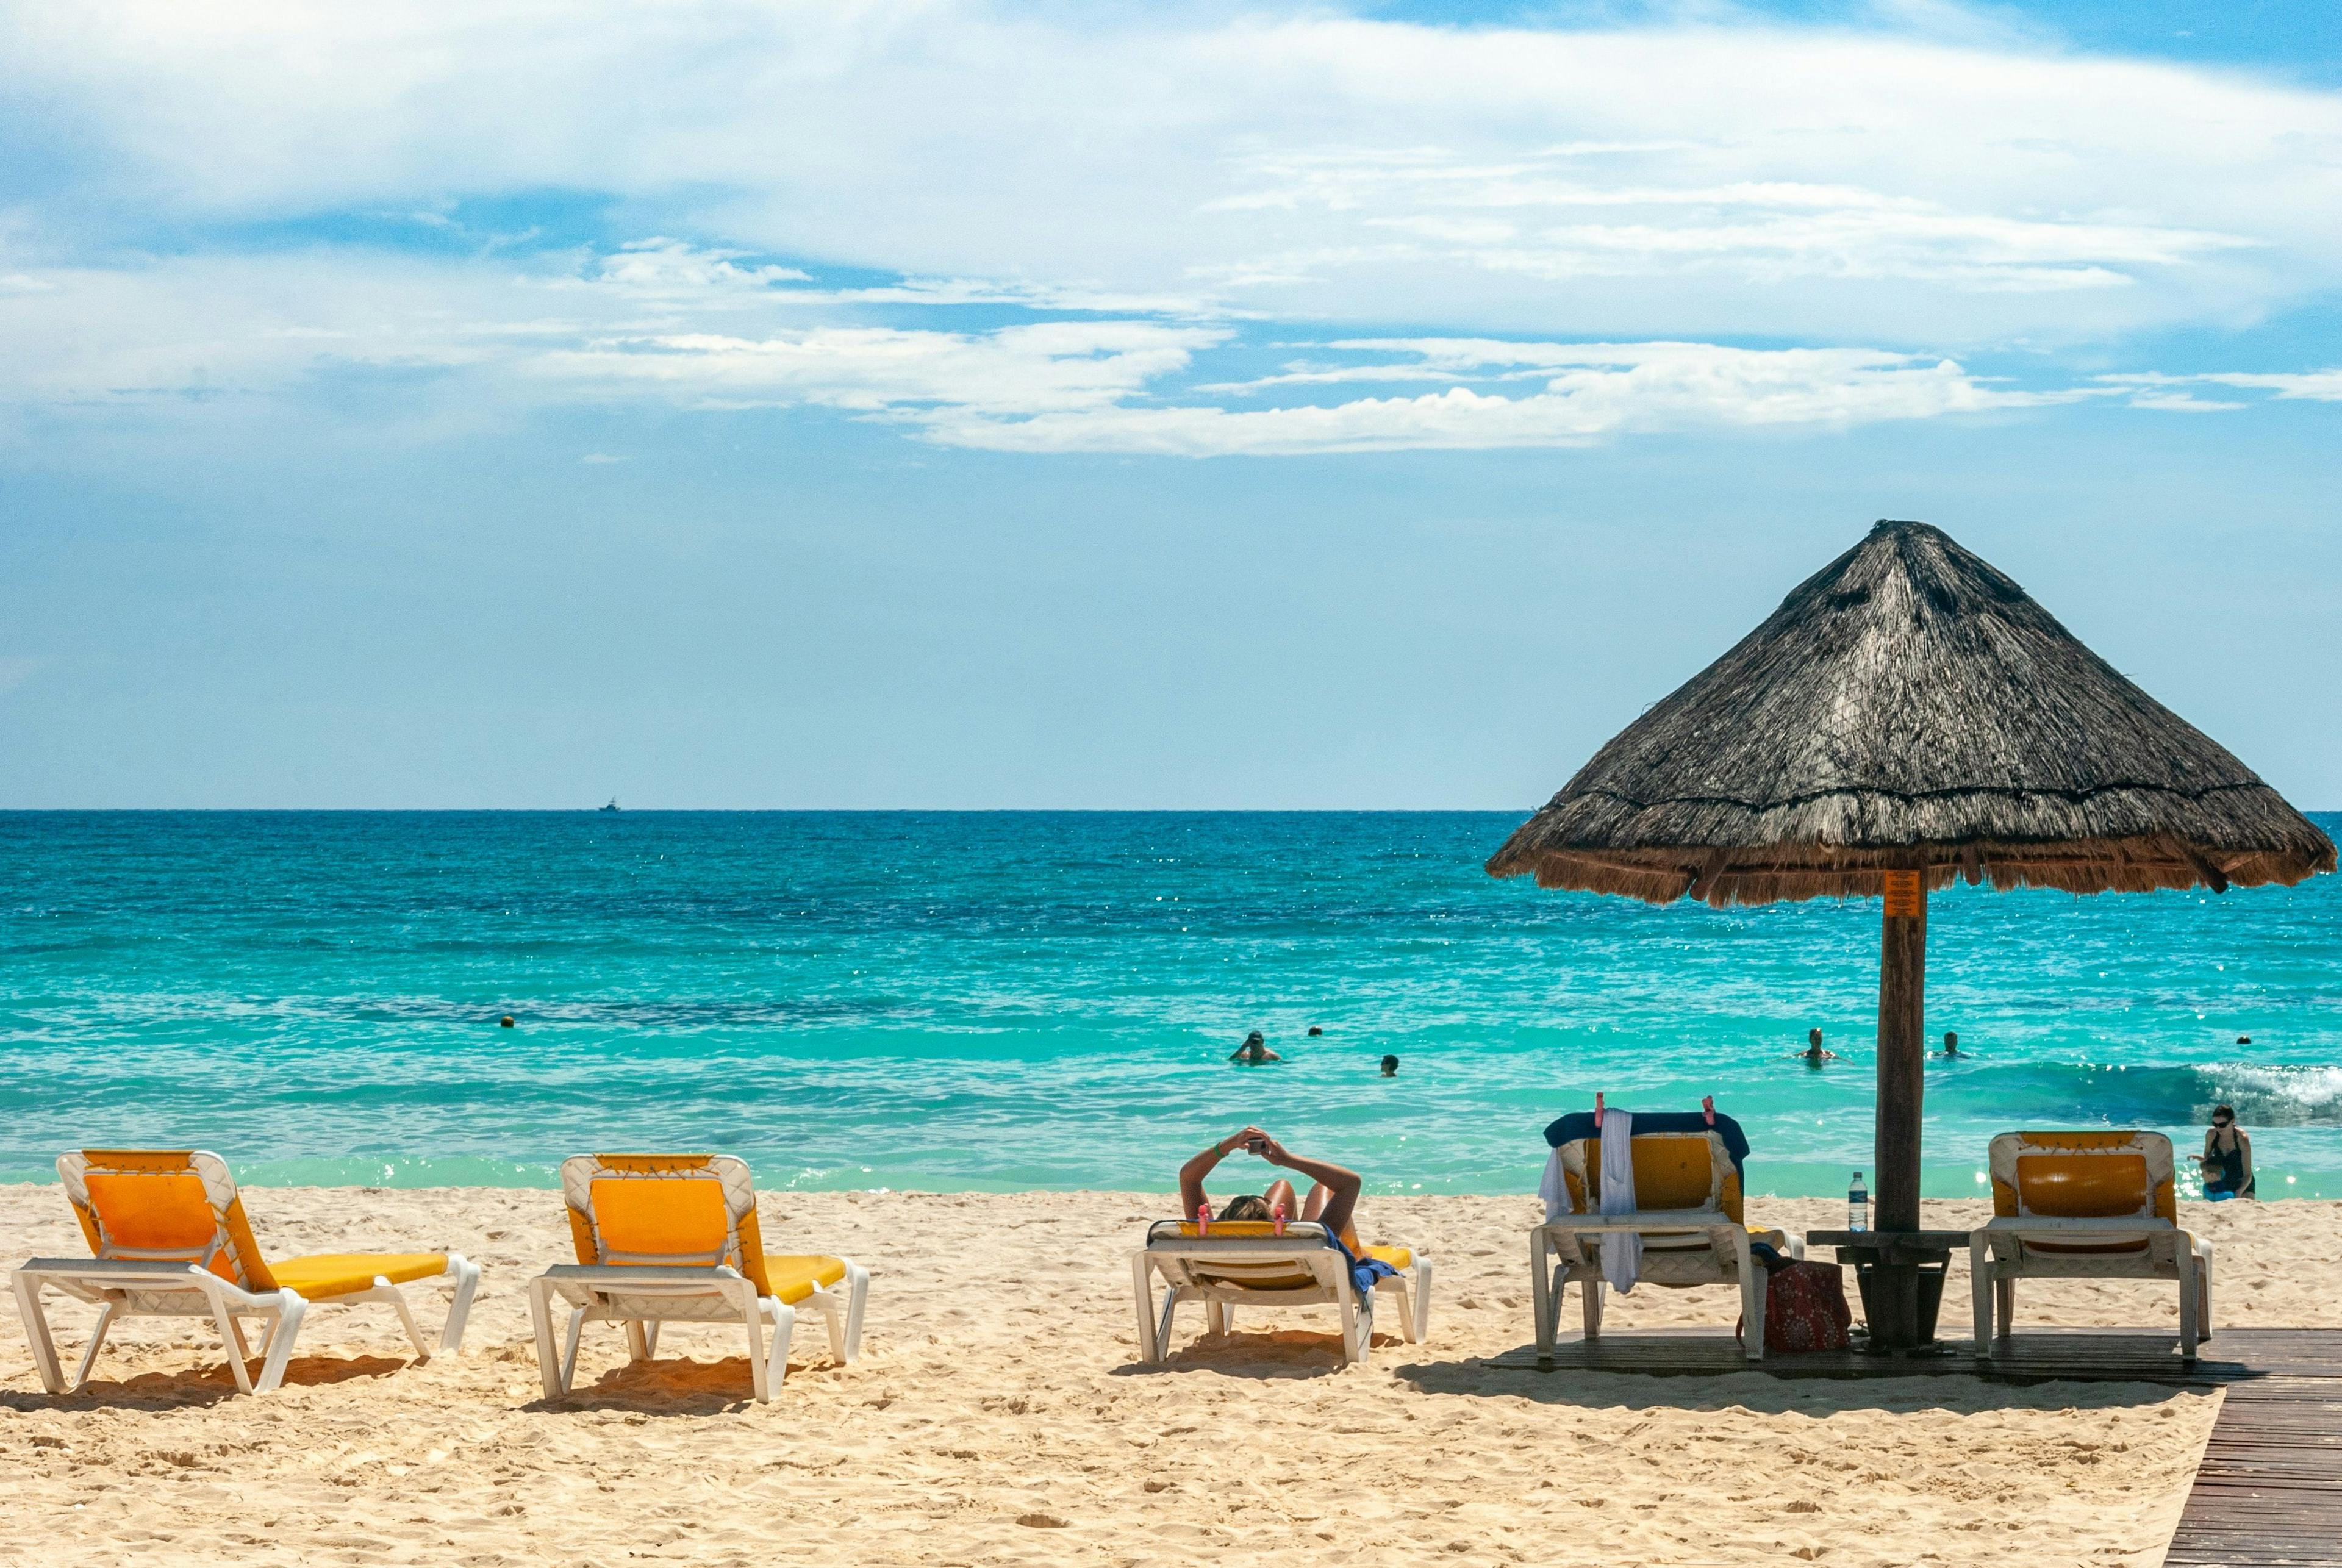 Sunbeds and umbrellas on the beach in Cancun